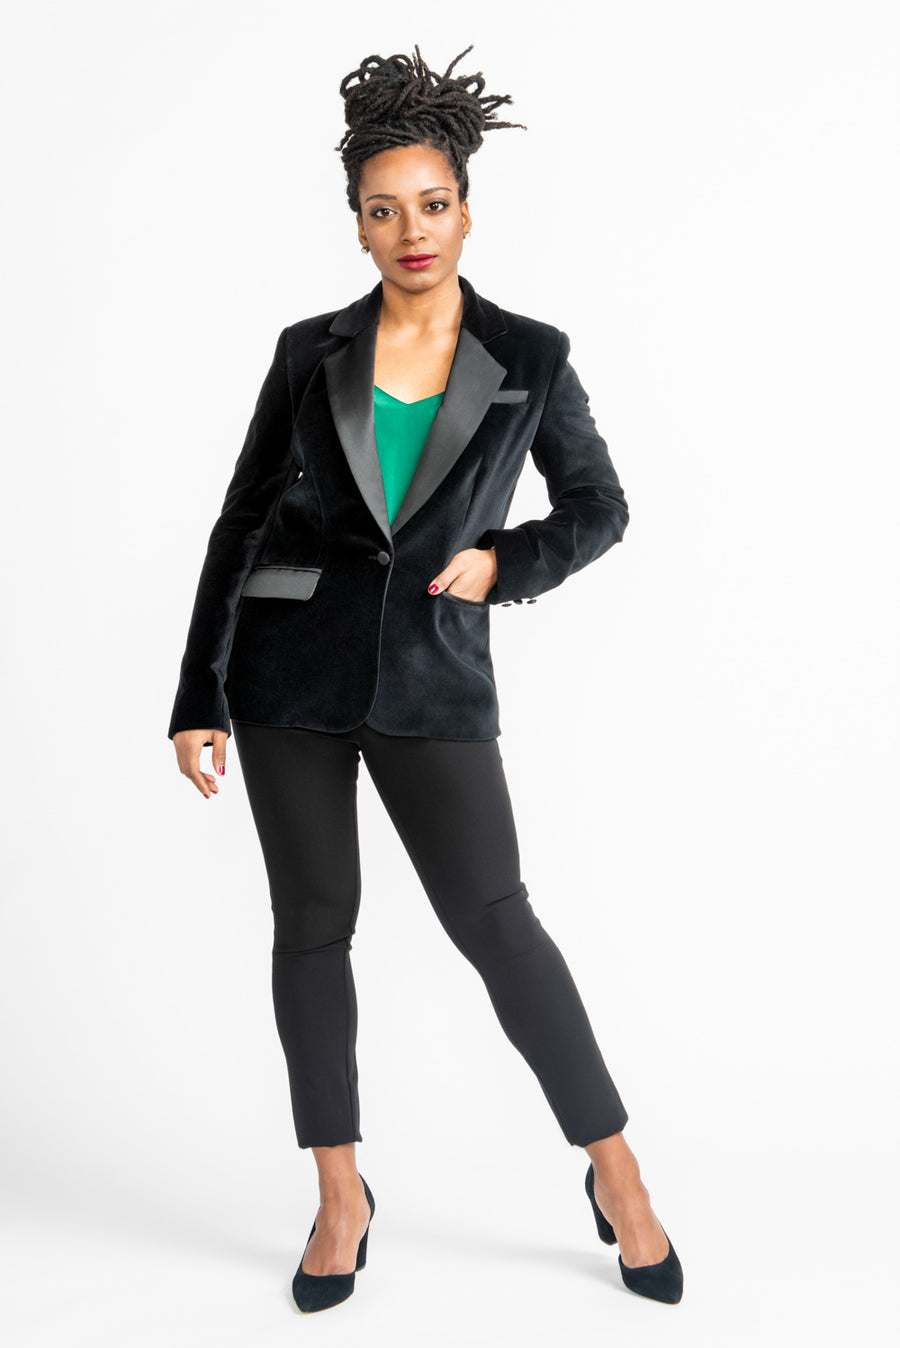 Shoulder Pad Cropped Tailored Blazer  Tailored blazer, Suits for women,  Plus size outfits